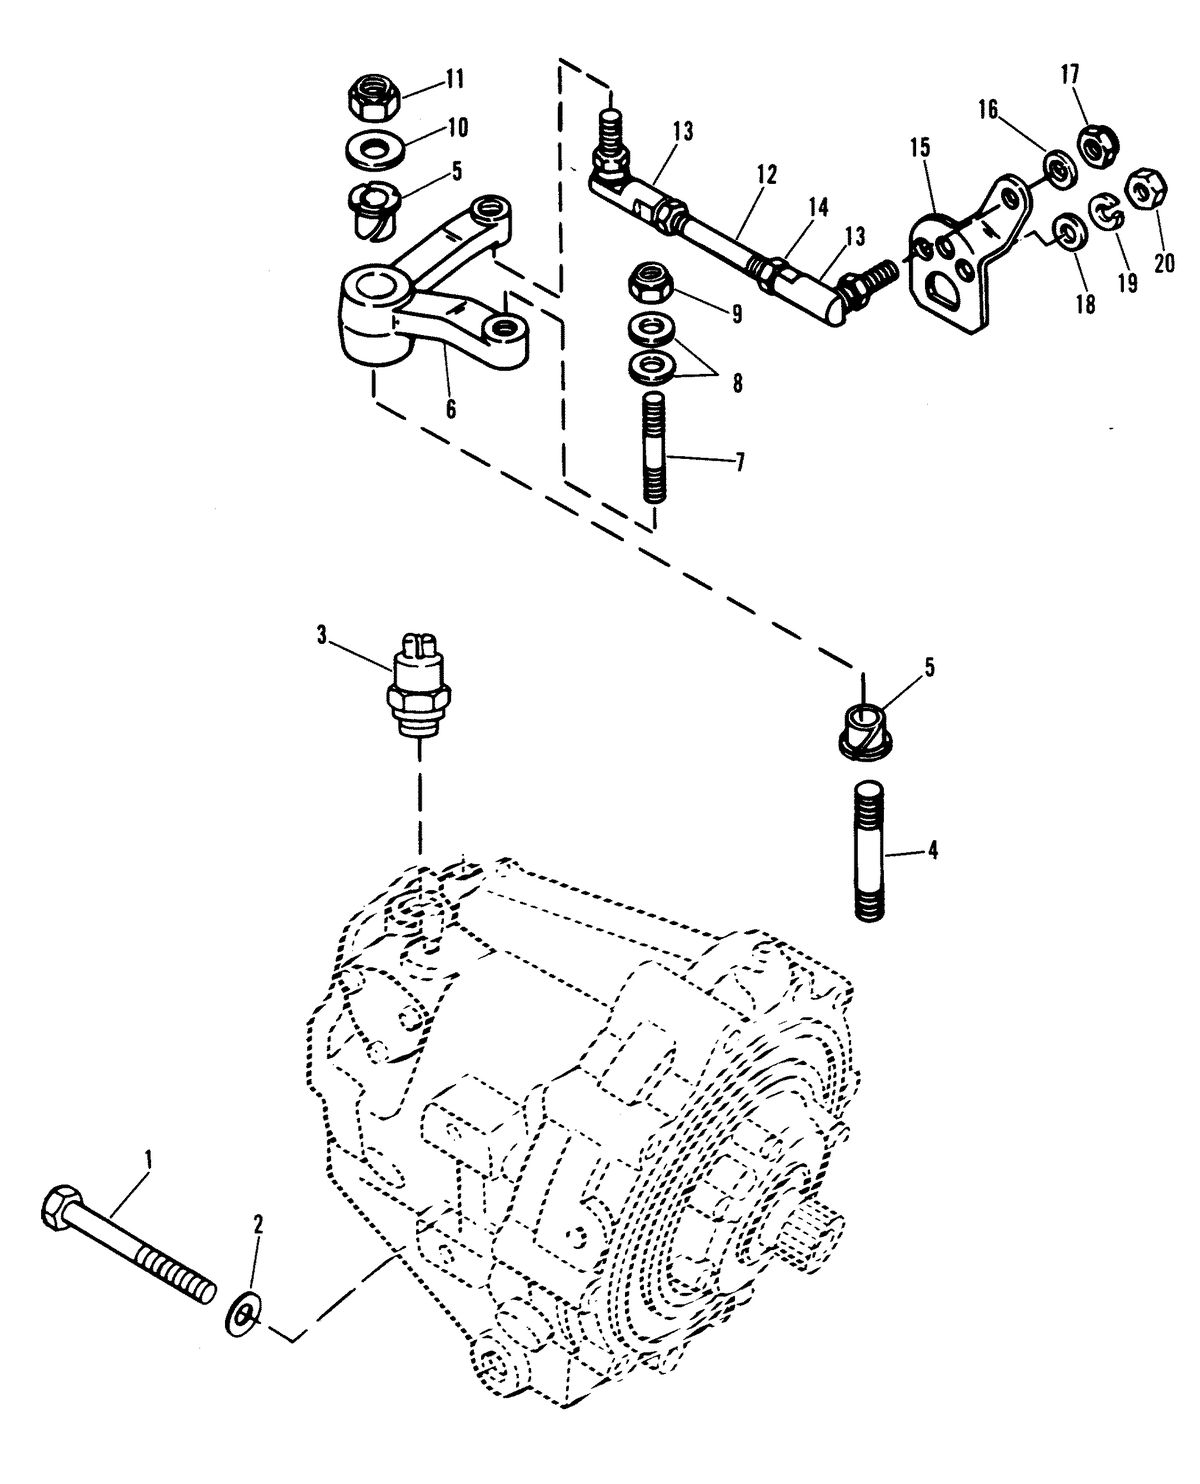 MERCRUISER 370 H.P. TRS ENGINE (CARD 37) TRANSMISSION AND SHIFT LINKAGE